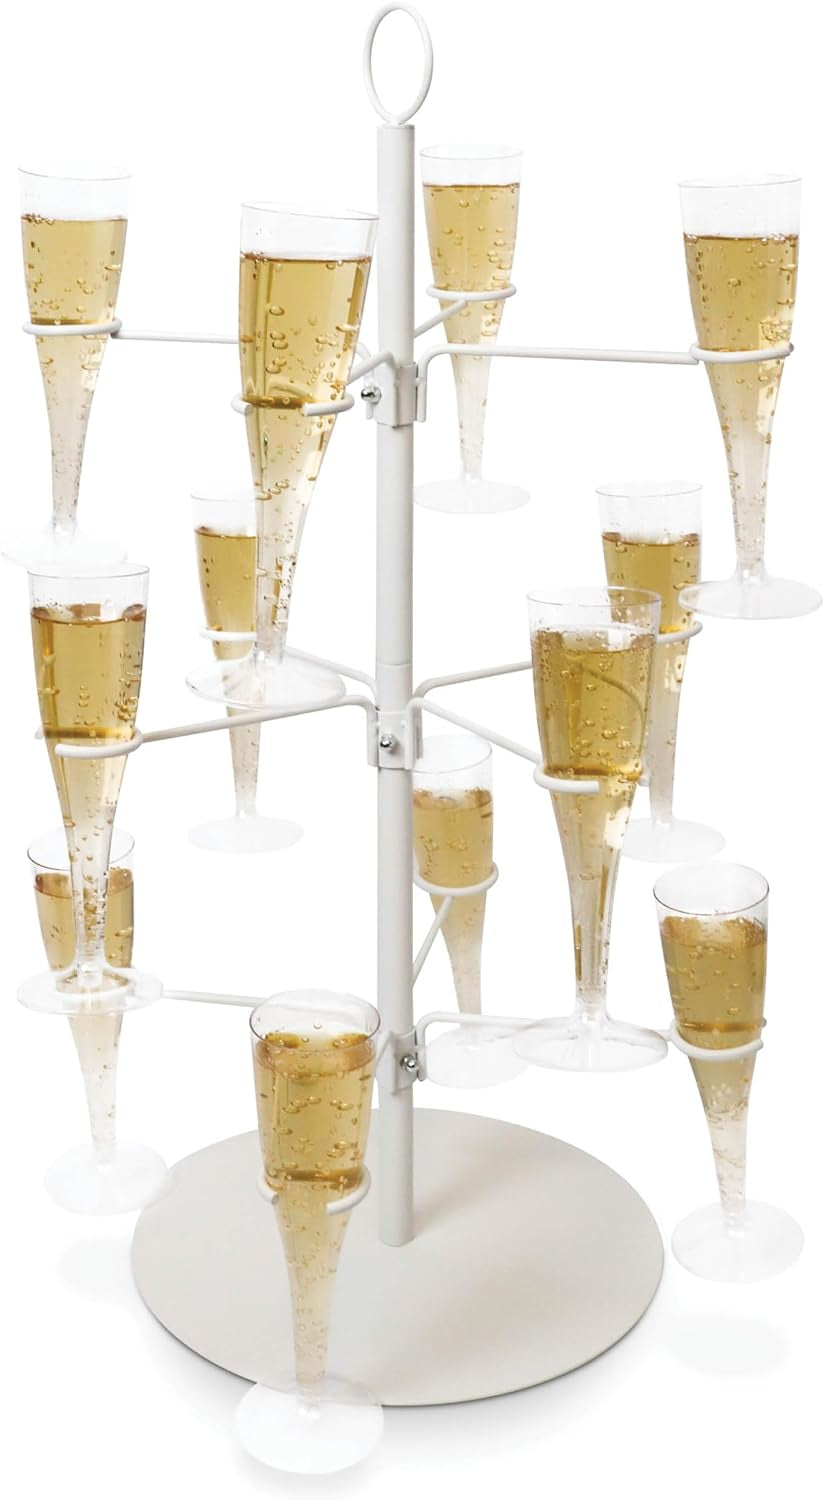 Cocktail Tree Stand, Wine Glass Flight Tasting Display for Drinks, 3 Tier -  12 Holders for Champagne, Cocktails, Martini, Margarita Cups at Weddings